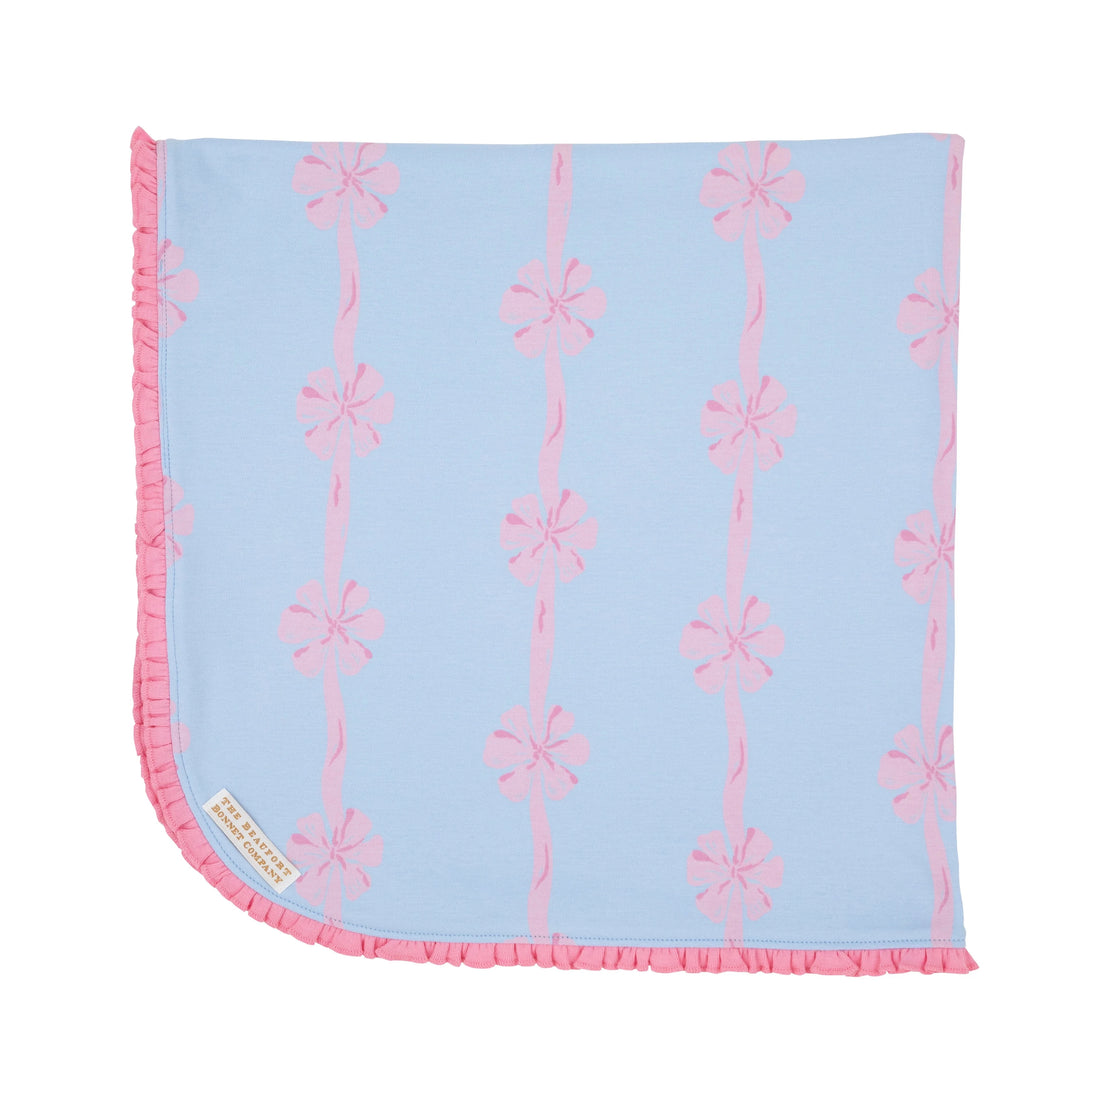 Beaufort Bonnet Baby Buggy Blanket- No Bow, No Go With Hamptons Hot Pink